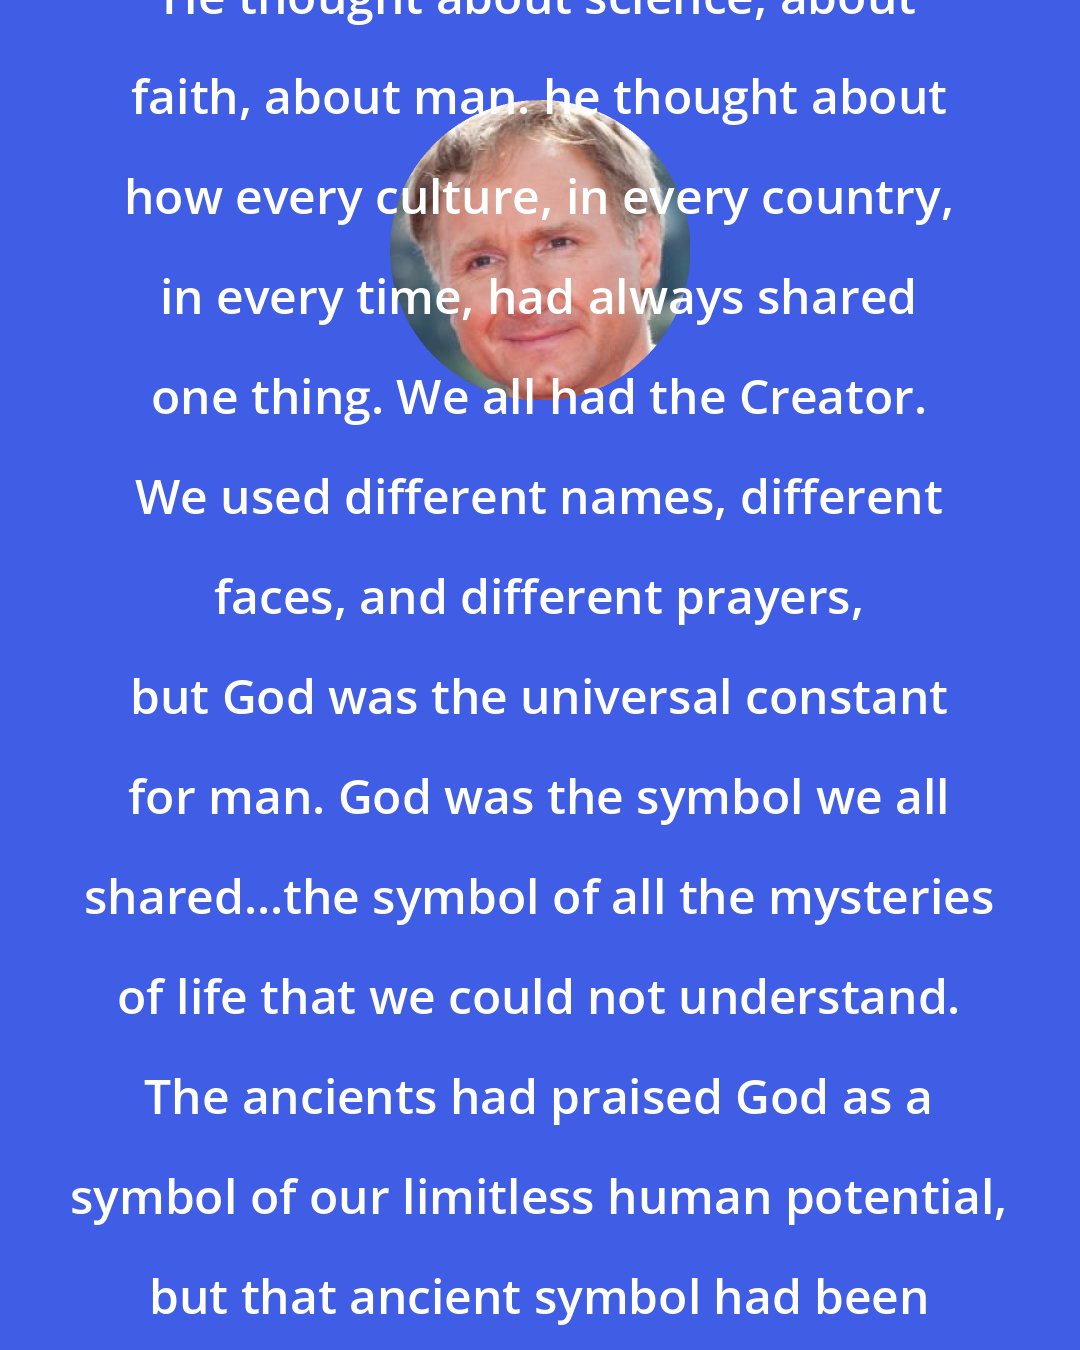 Dan Brown: He thought about science, about faith, about man. he thought about how every culture, in every country, in every time, had always shared one thing. We all had the Creator. We used different names, different faces, and different prayers, but God was the universal constant for man. God was the symbol we all shared...the symbol of all the mysteries of life that we could not understand. The ancients had praised God as a symbol of our limitless human potential, but that ancient symbol had been lost over time. Until now.